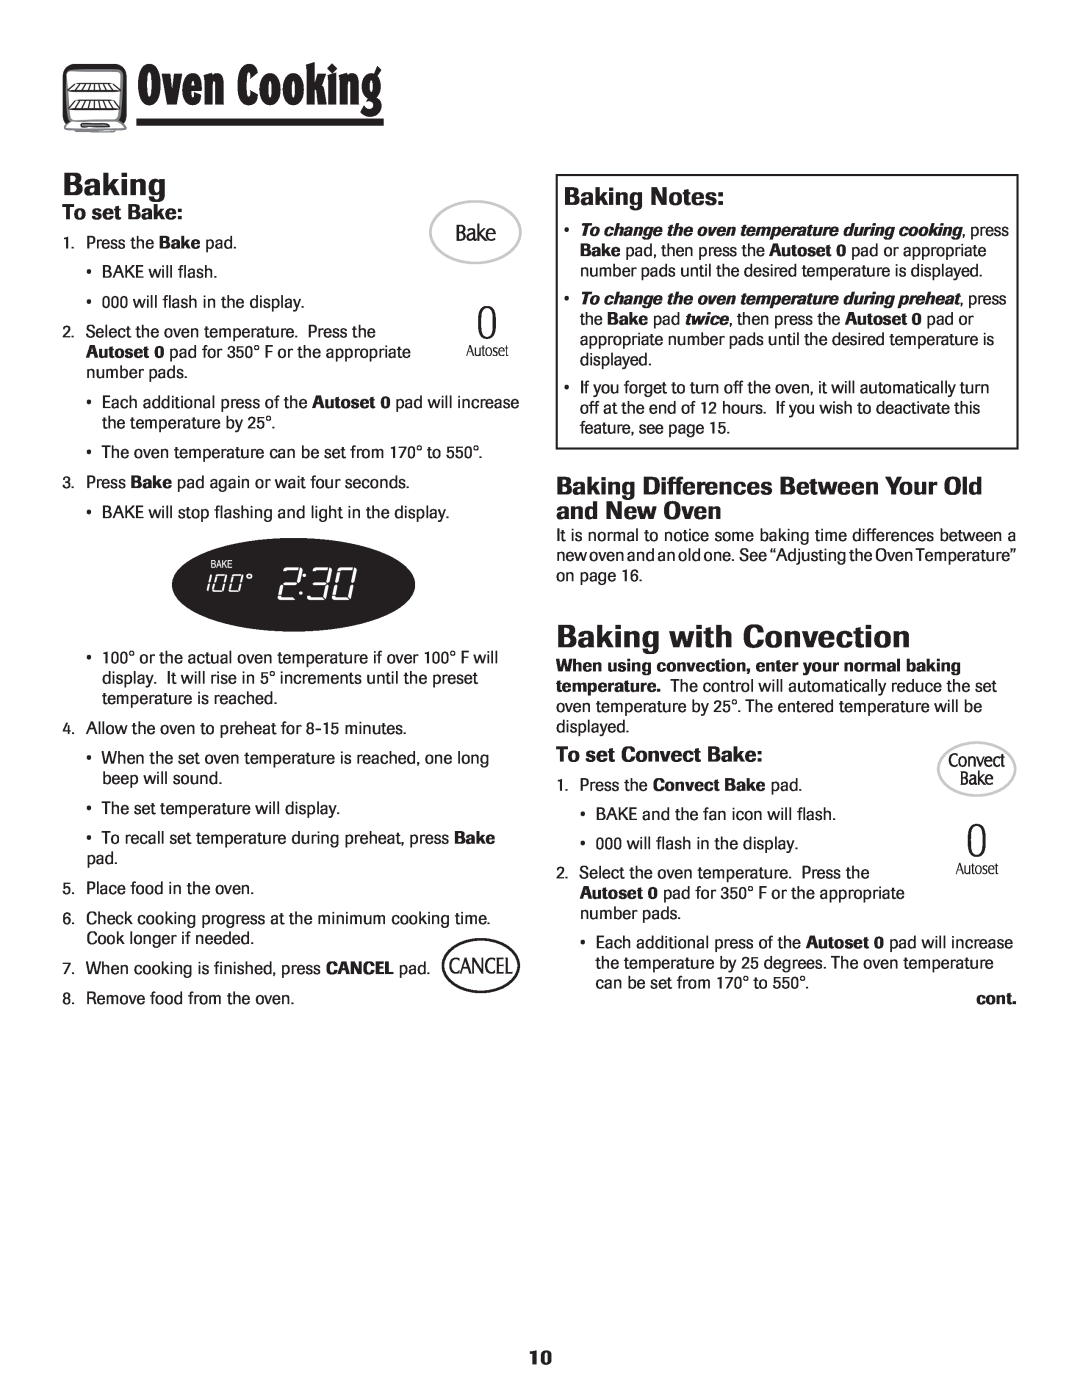 Maytag MER5875RAF Baking with Convection, Baking Notes, Baking Differences Between Your Old and New Oven, To set Bake 